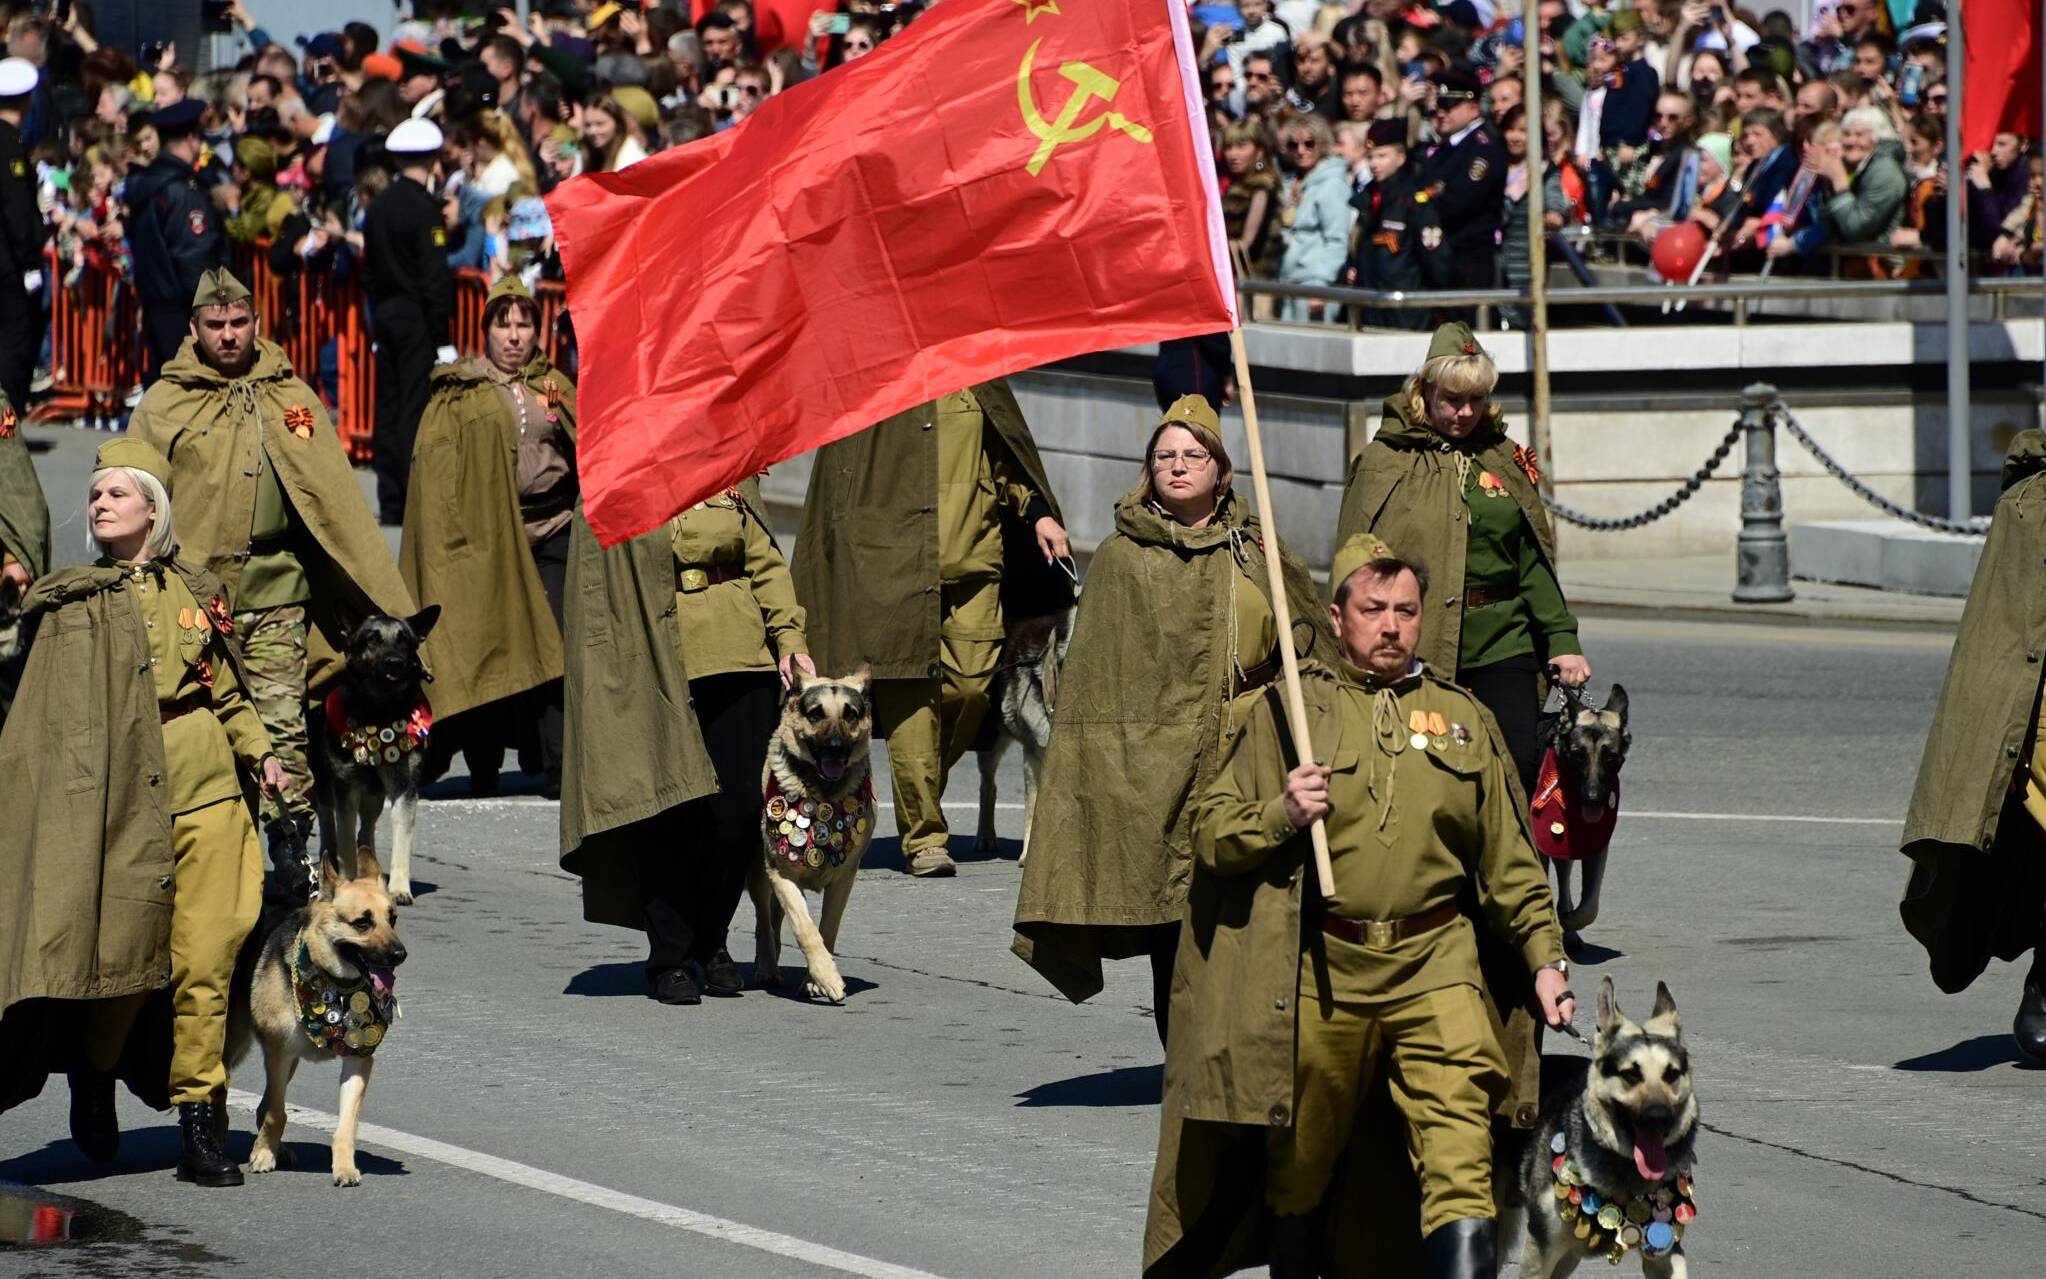 Participants wearing historical uniforms take part in a military parade, which marks the 77th anniversary of the Soviet victory over Nazi Germany in World War Two, in the far eastern city of Vladivostok on May 9, 2022. (Photo by Pavel KOROLYOV / AFP)